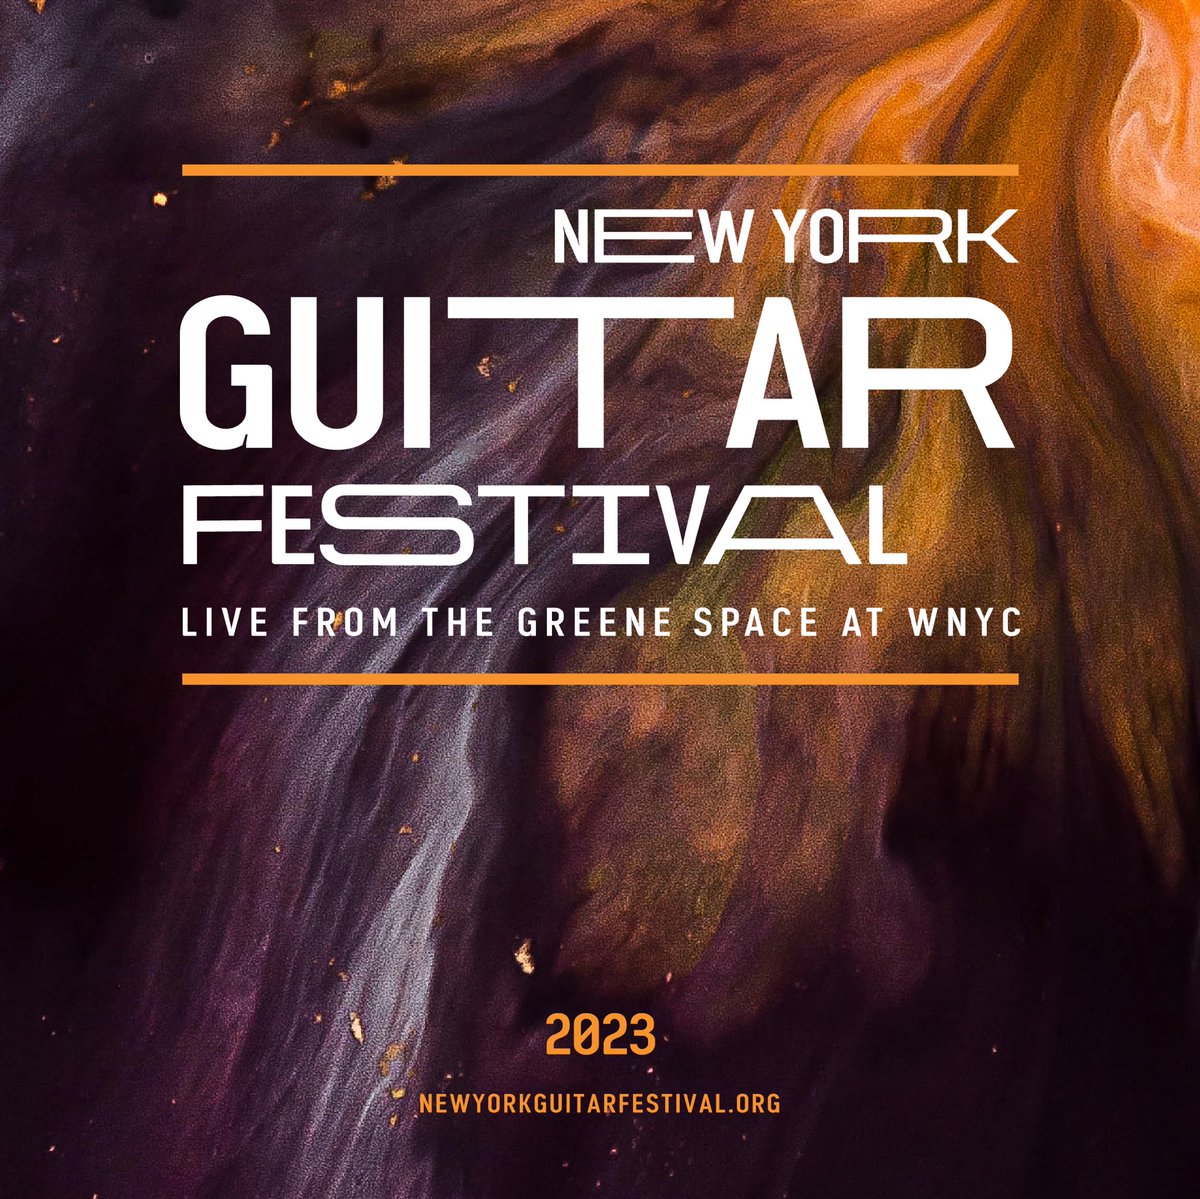 June 12 + 13 the New York Guitar Festival returns to the Greene Space at WNYC. Link to tickets and full info in bio. #guitar